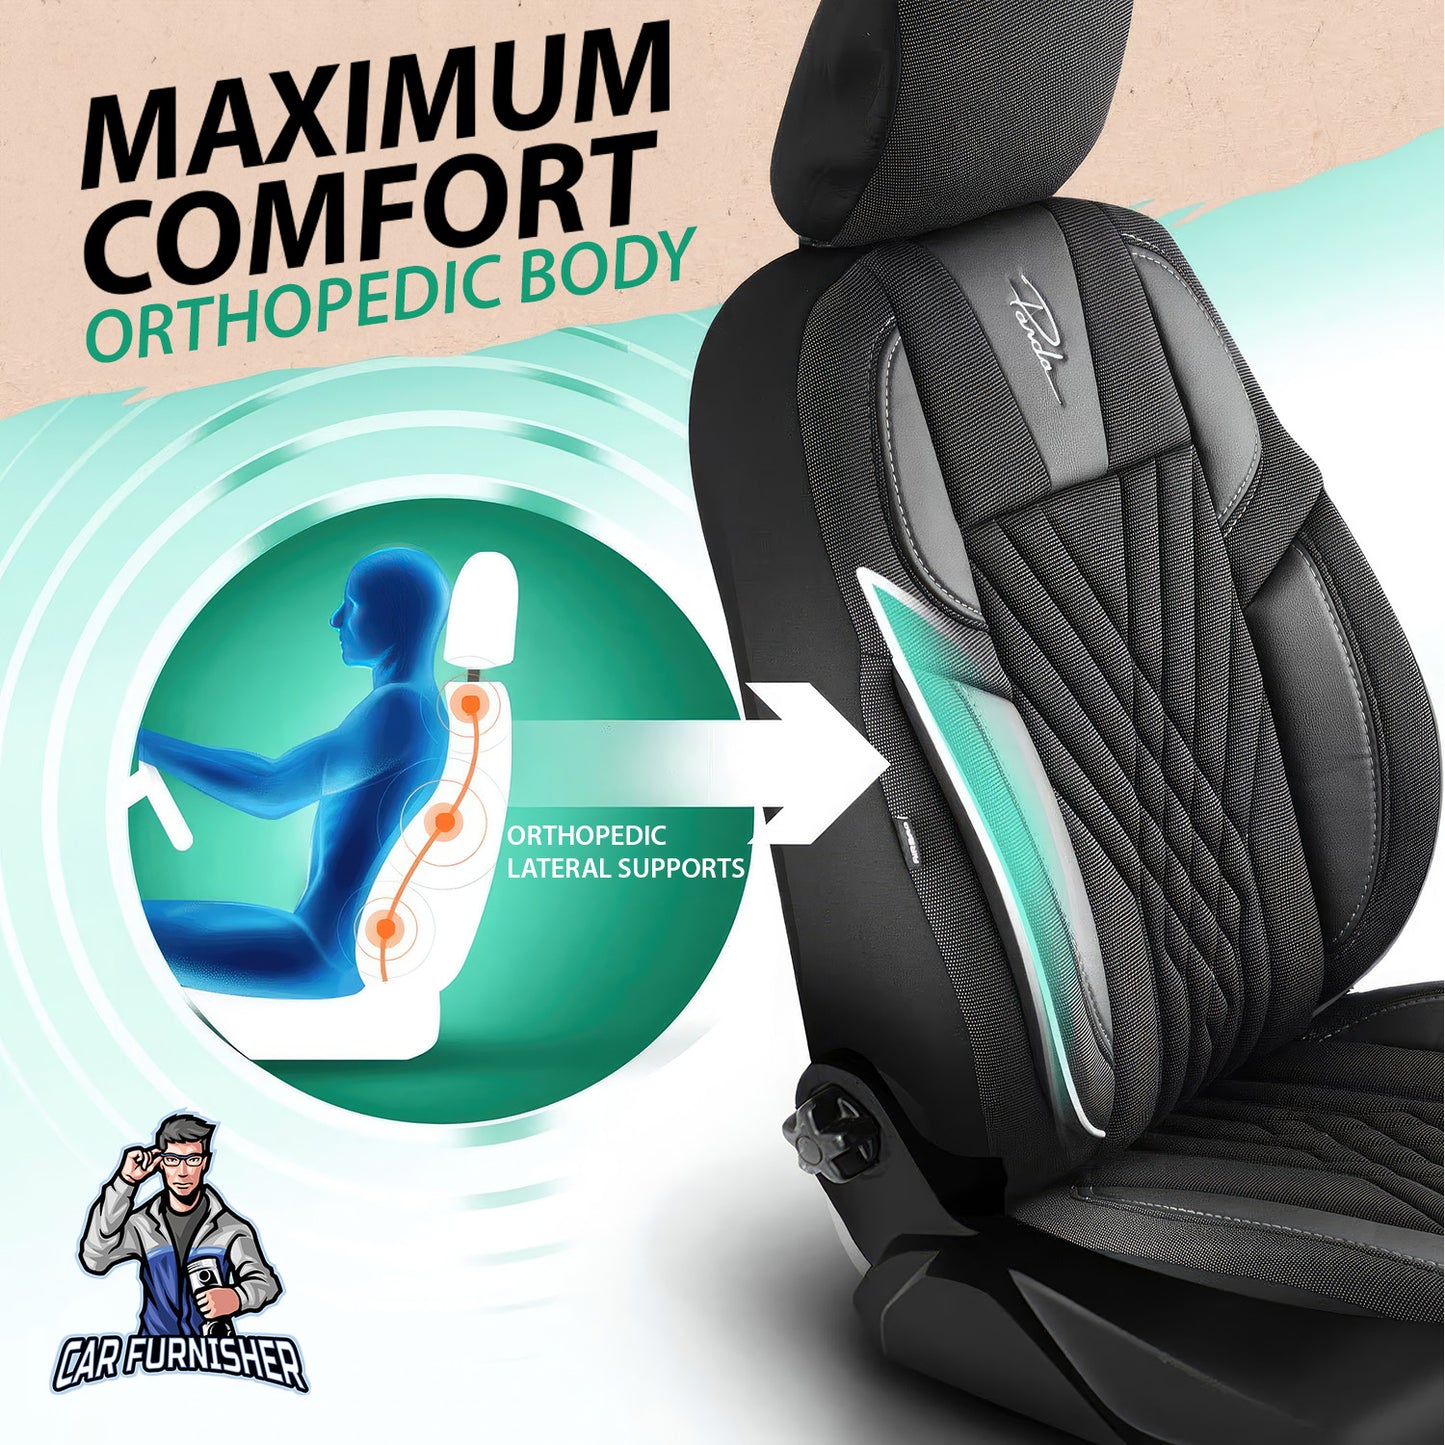 Car Seat Cover Set - Vienna Design Gray 5 Seats + Headrests (Full Set) Leather & Pique Fabric